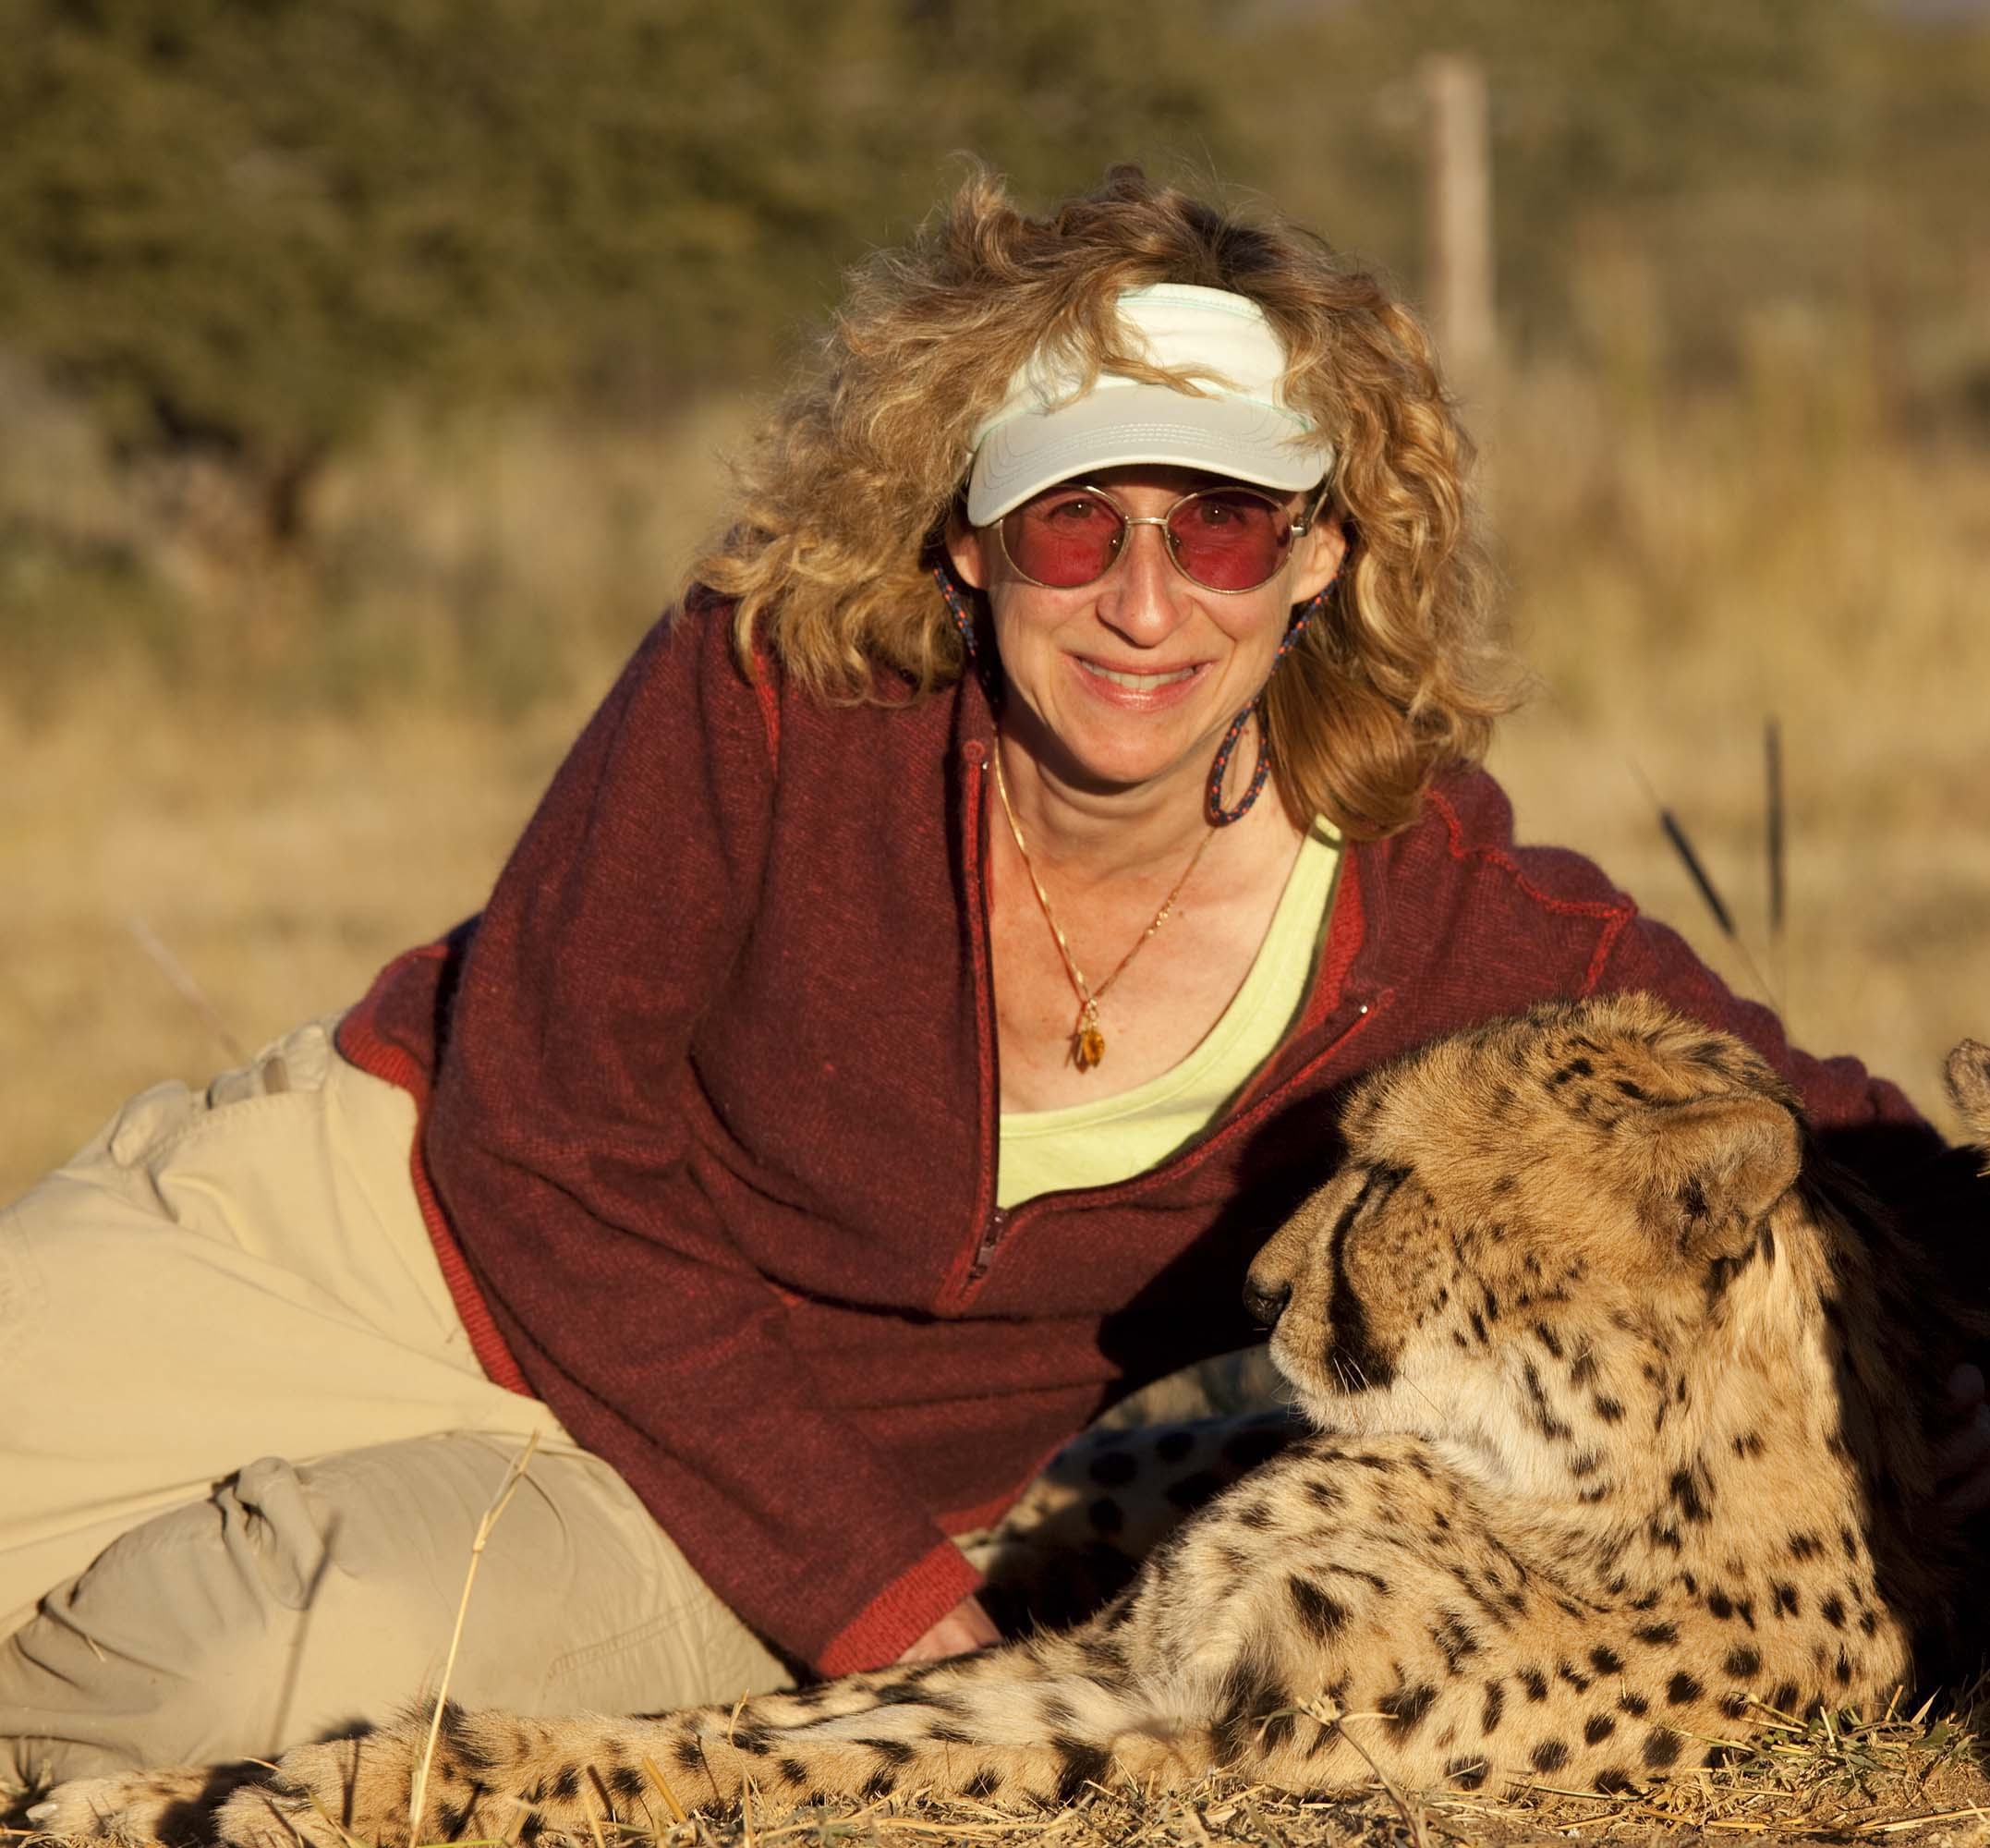 Sy with the Cheetah Conservation Fund’s ambassador cat. (Courtesy Nic Bishop)